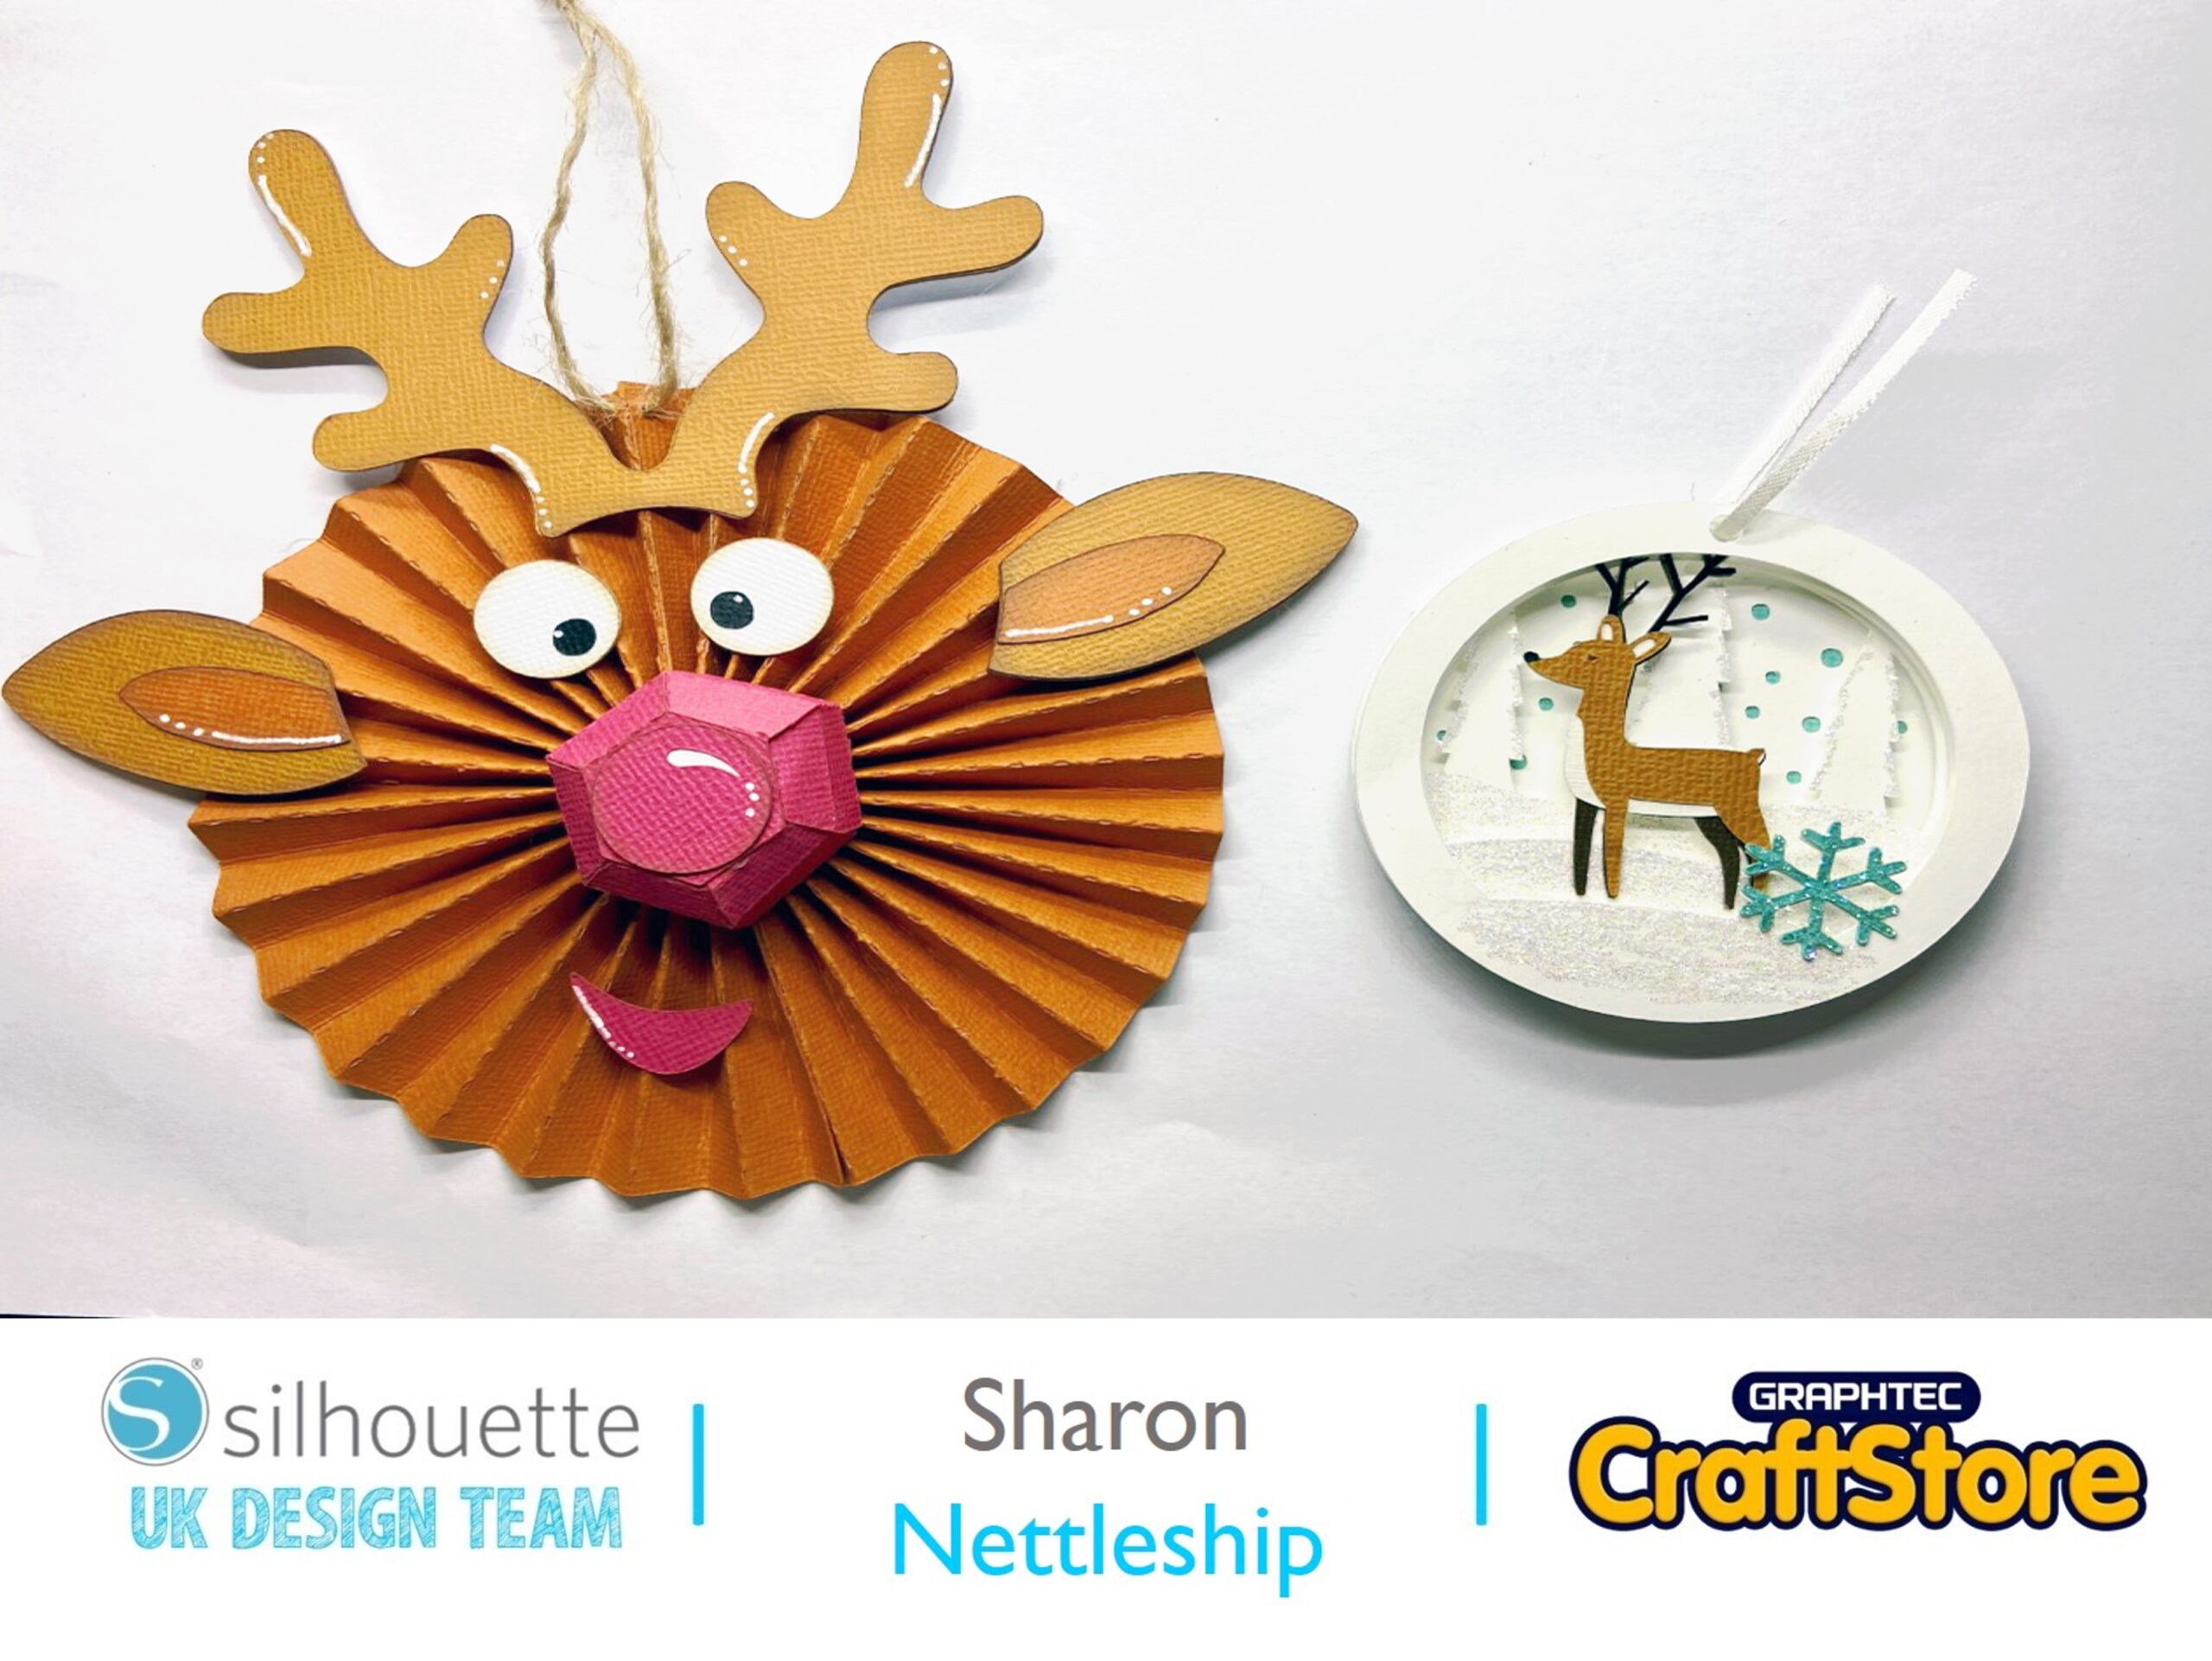 silhouette uk blog - sharon nettleship - wc4821-completed ornaments